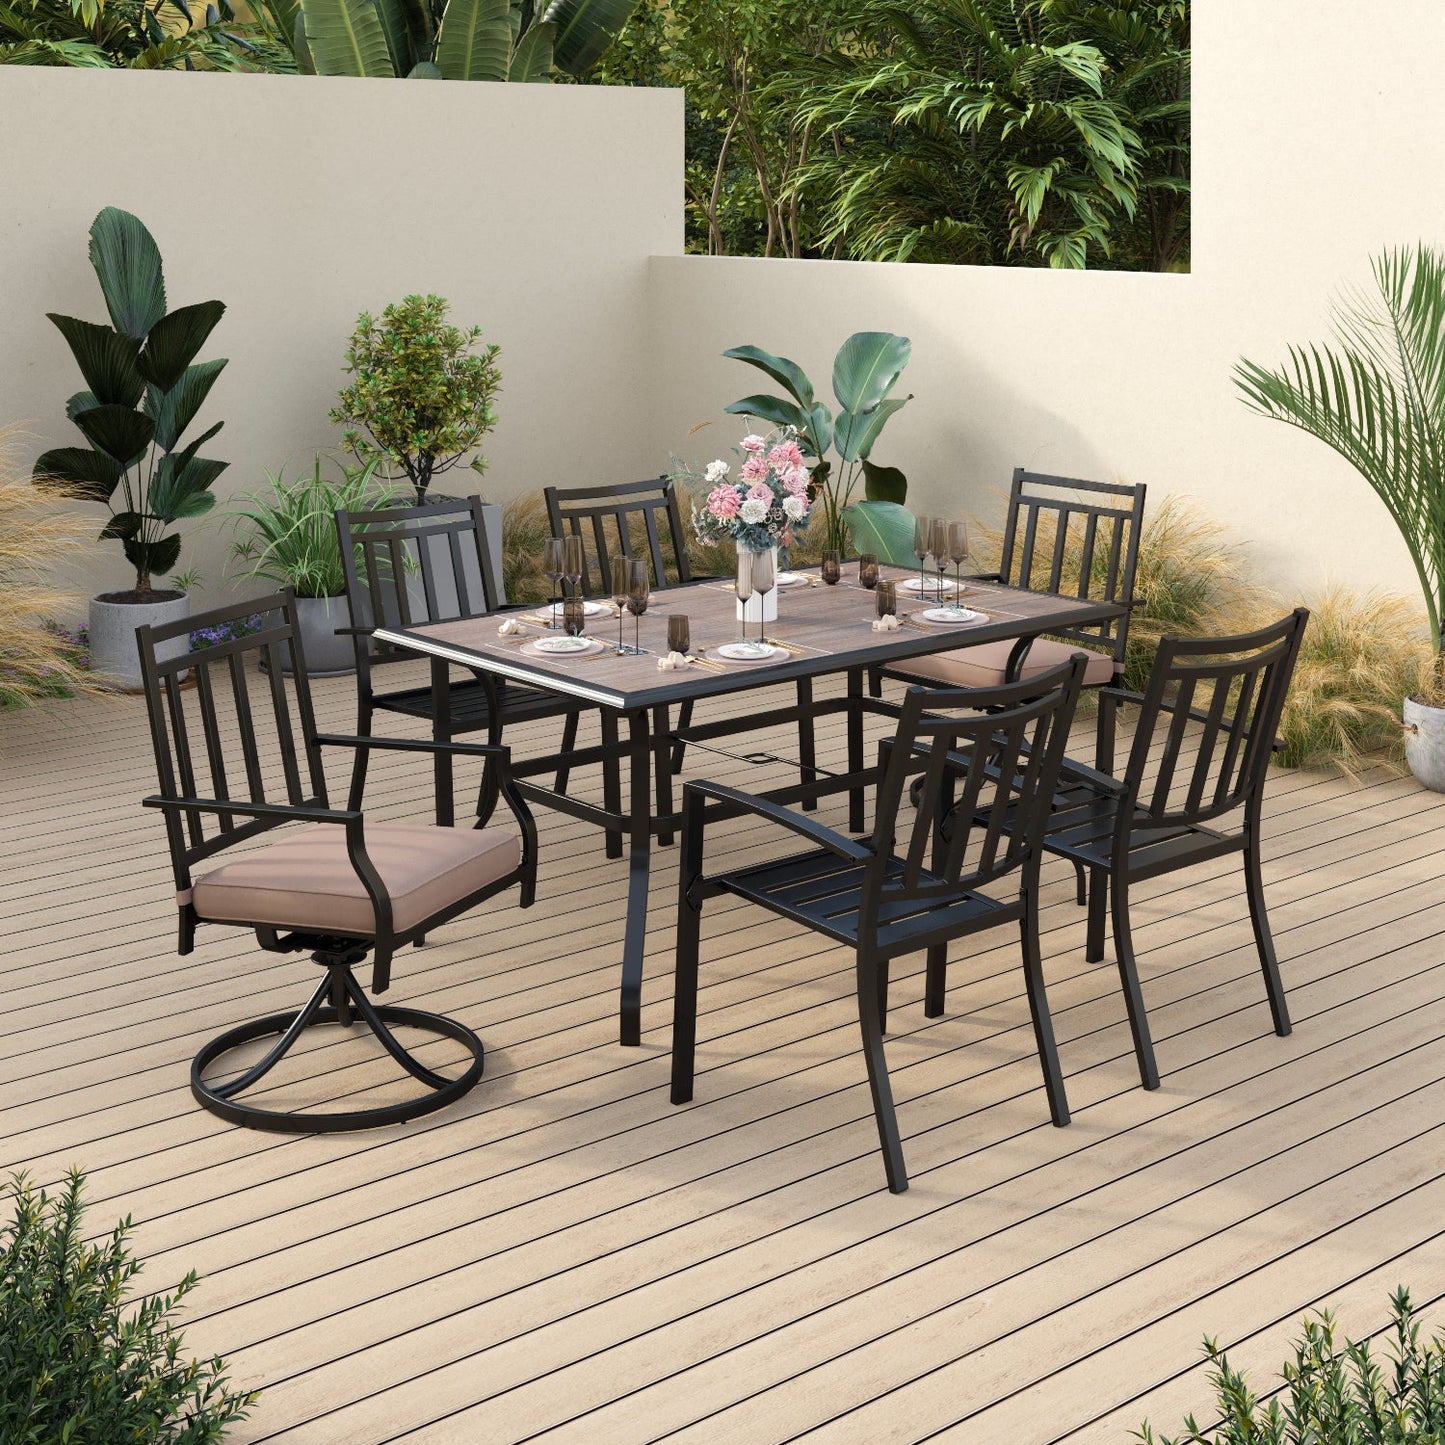 Sophia & William 7 Piece Outdoor Patio Dining Set Outdoor Furniture Set with 1 Steel Retangular Table and Metal Dining Chair